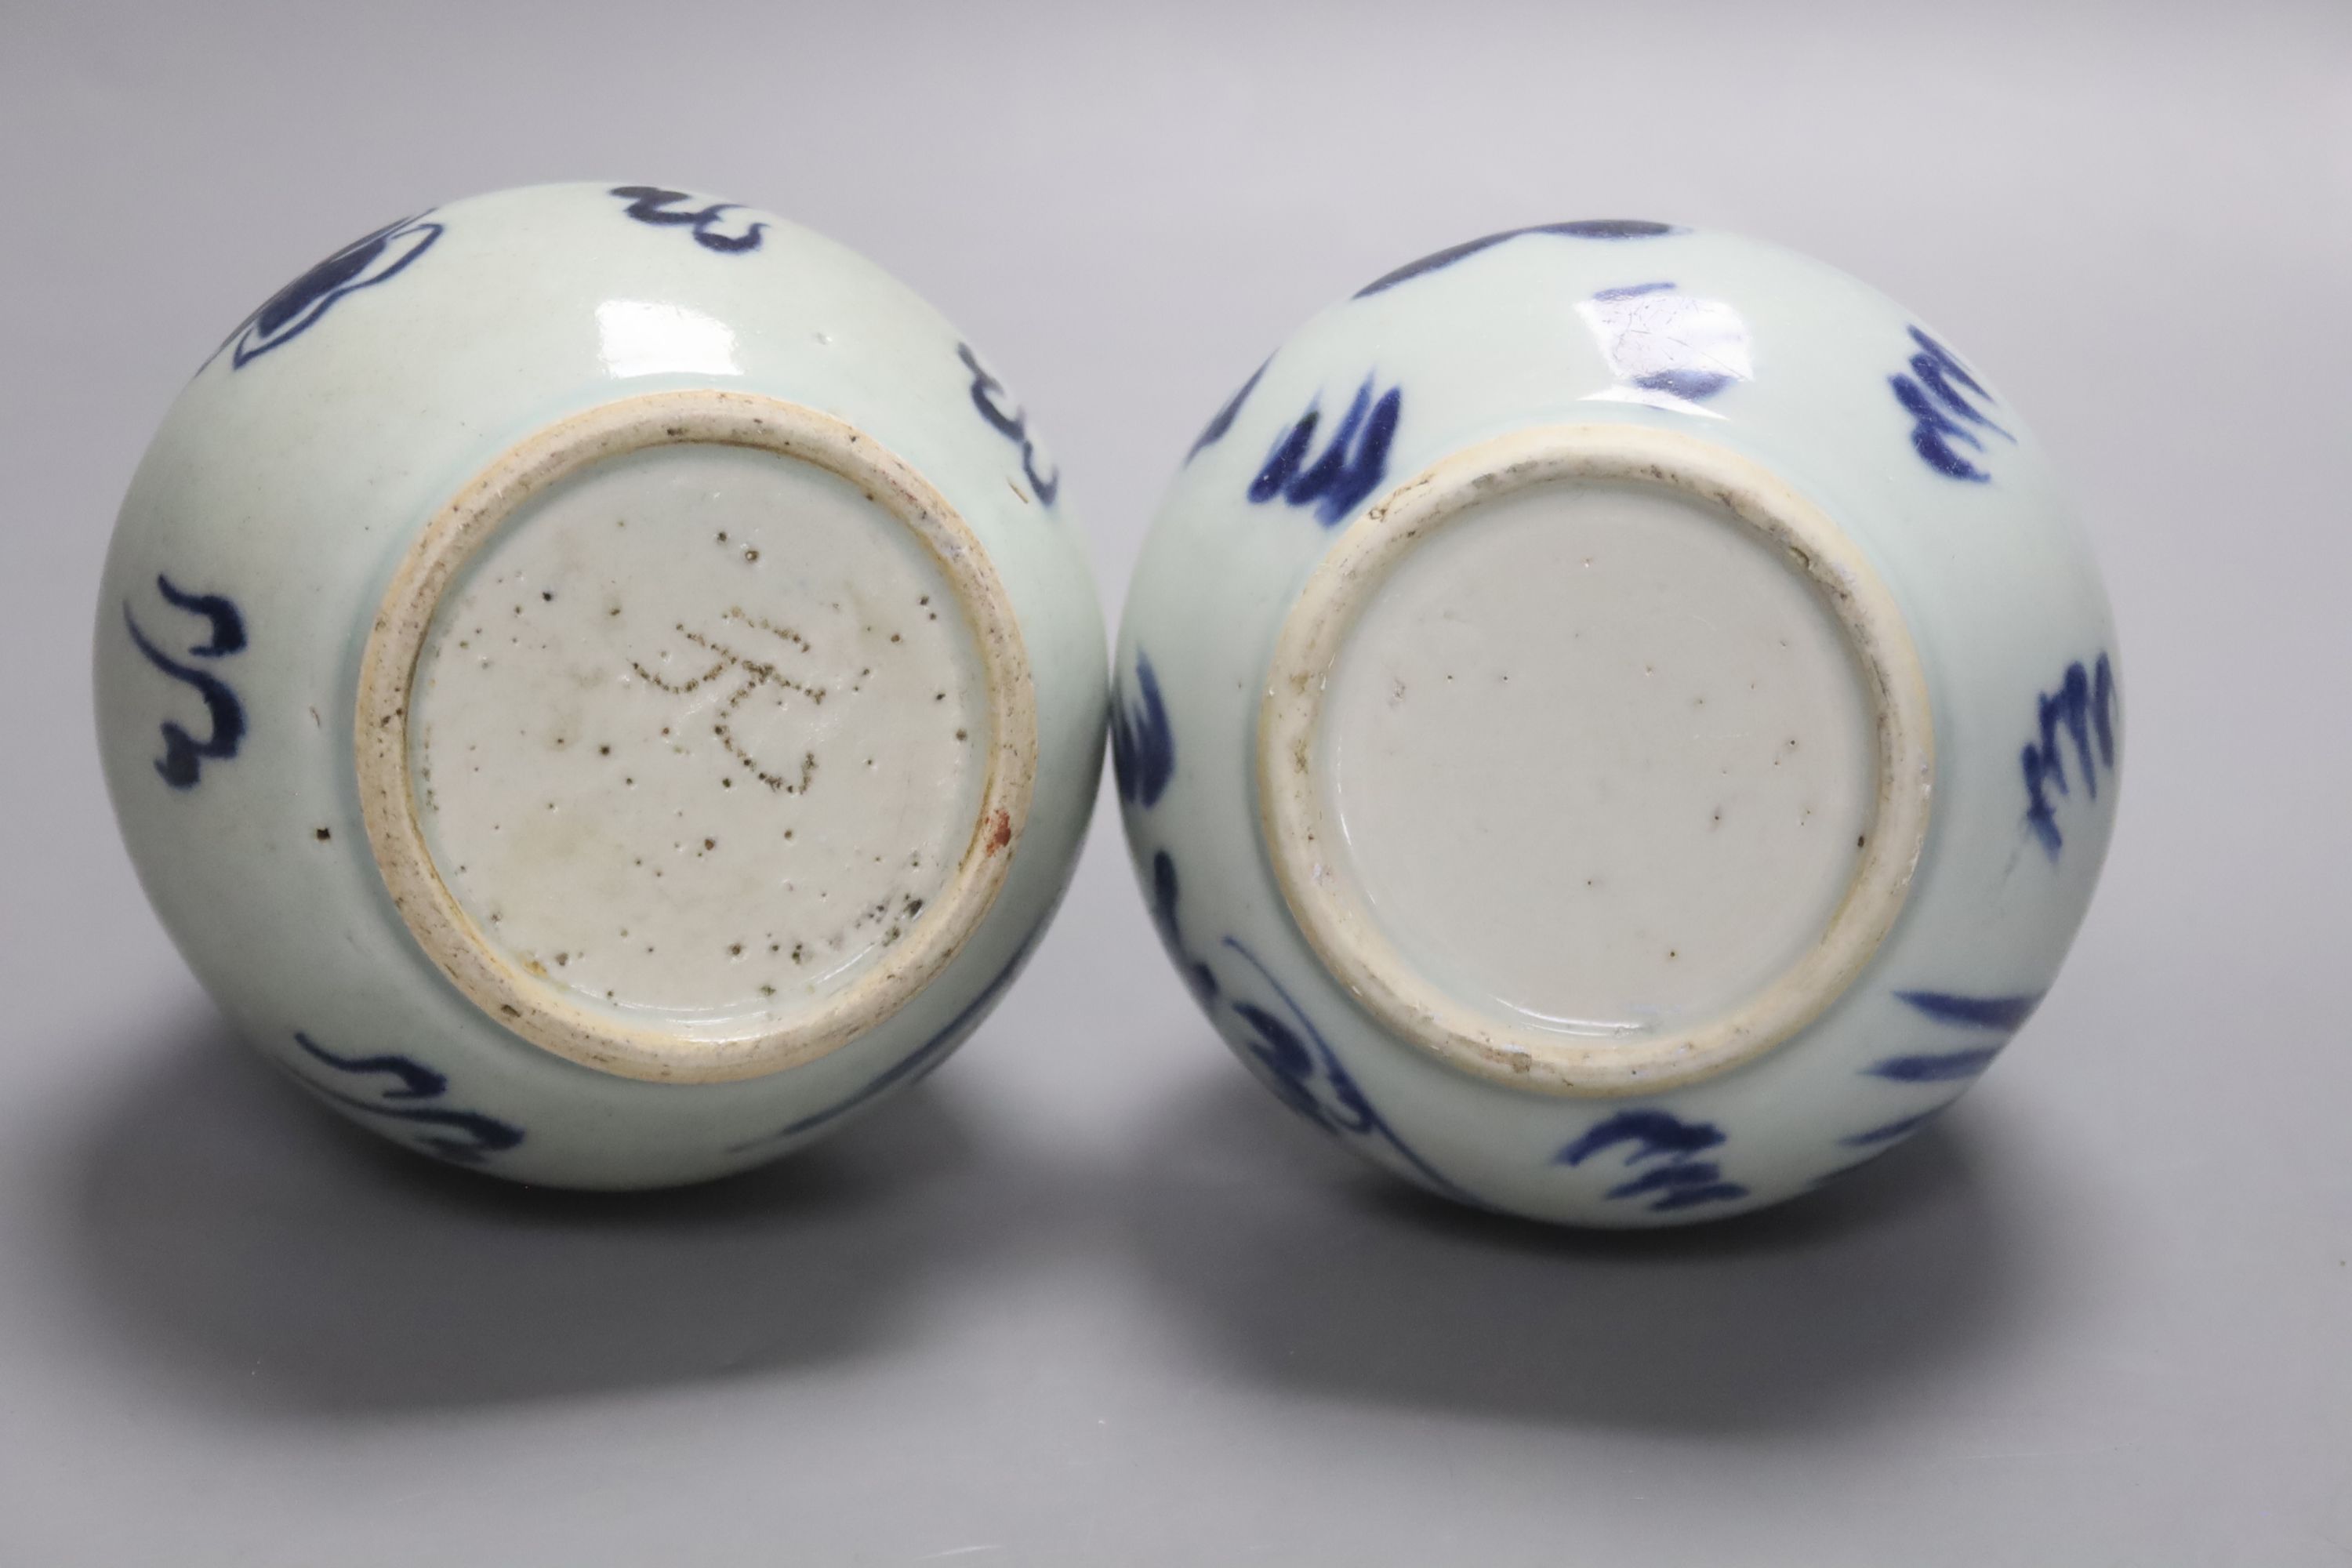 A pair of Chinese bottle vases, late 18th century, 18cm high